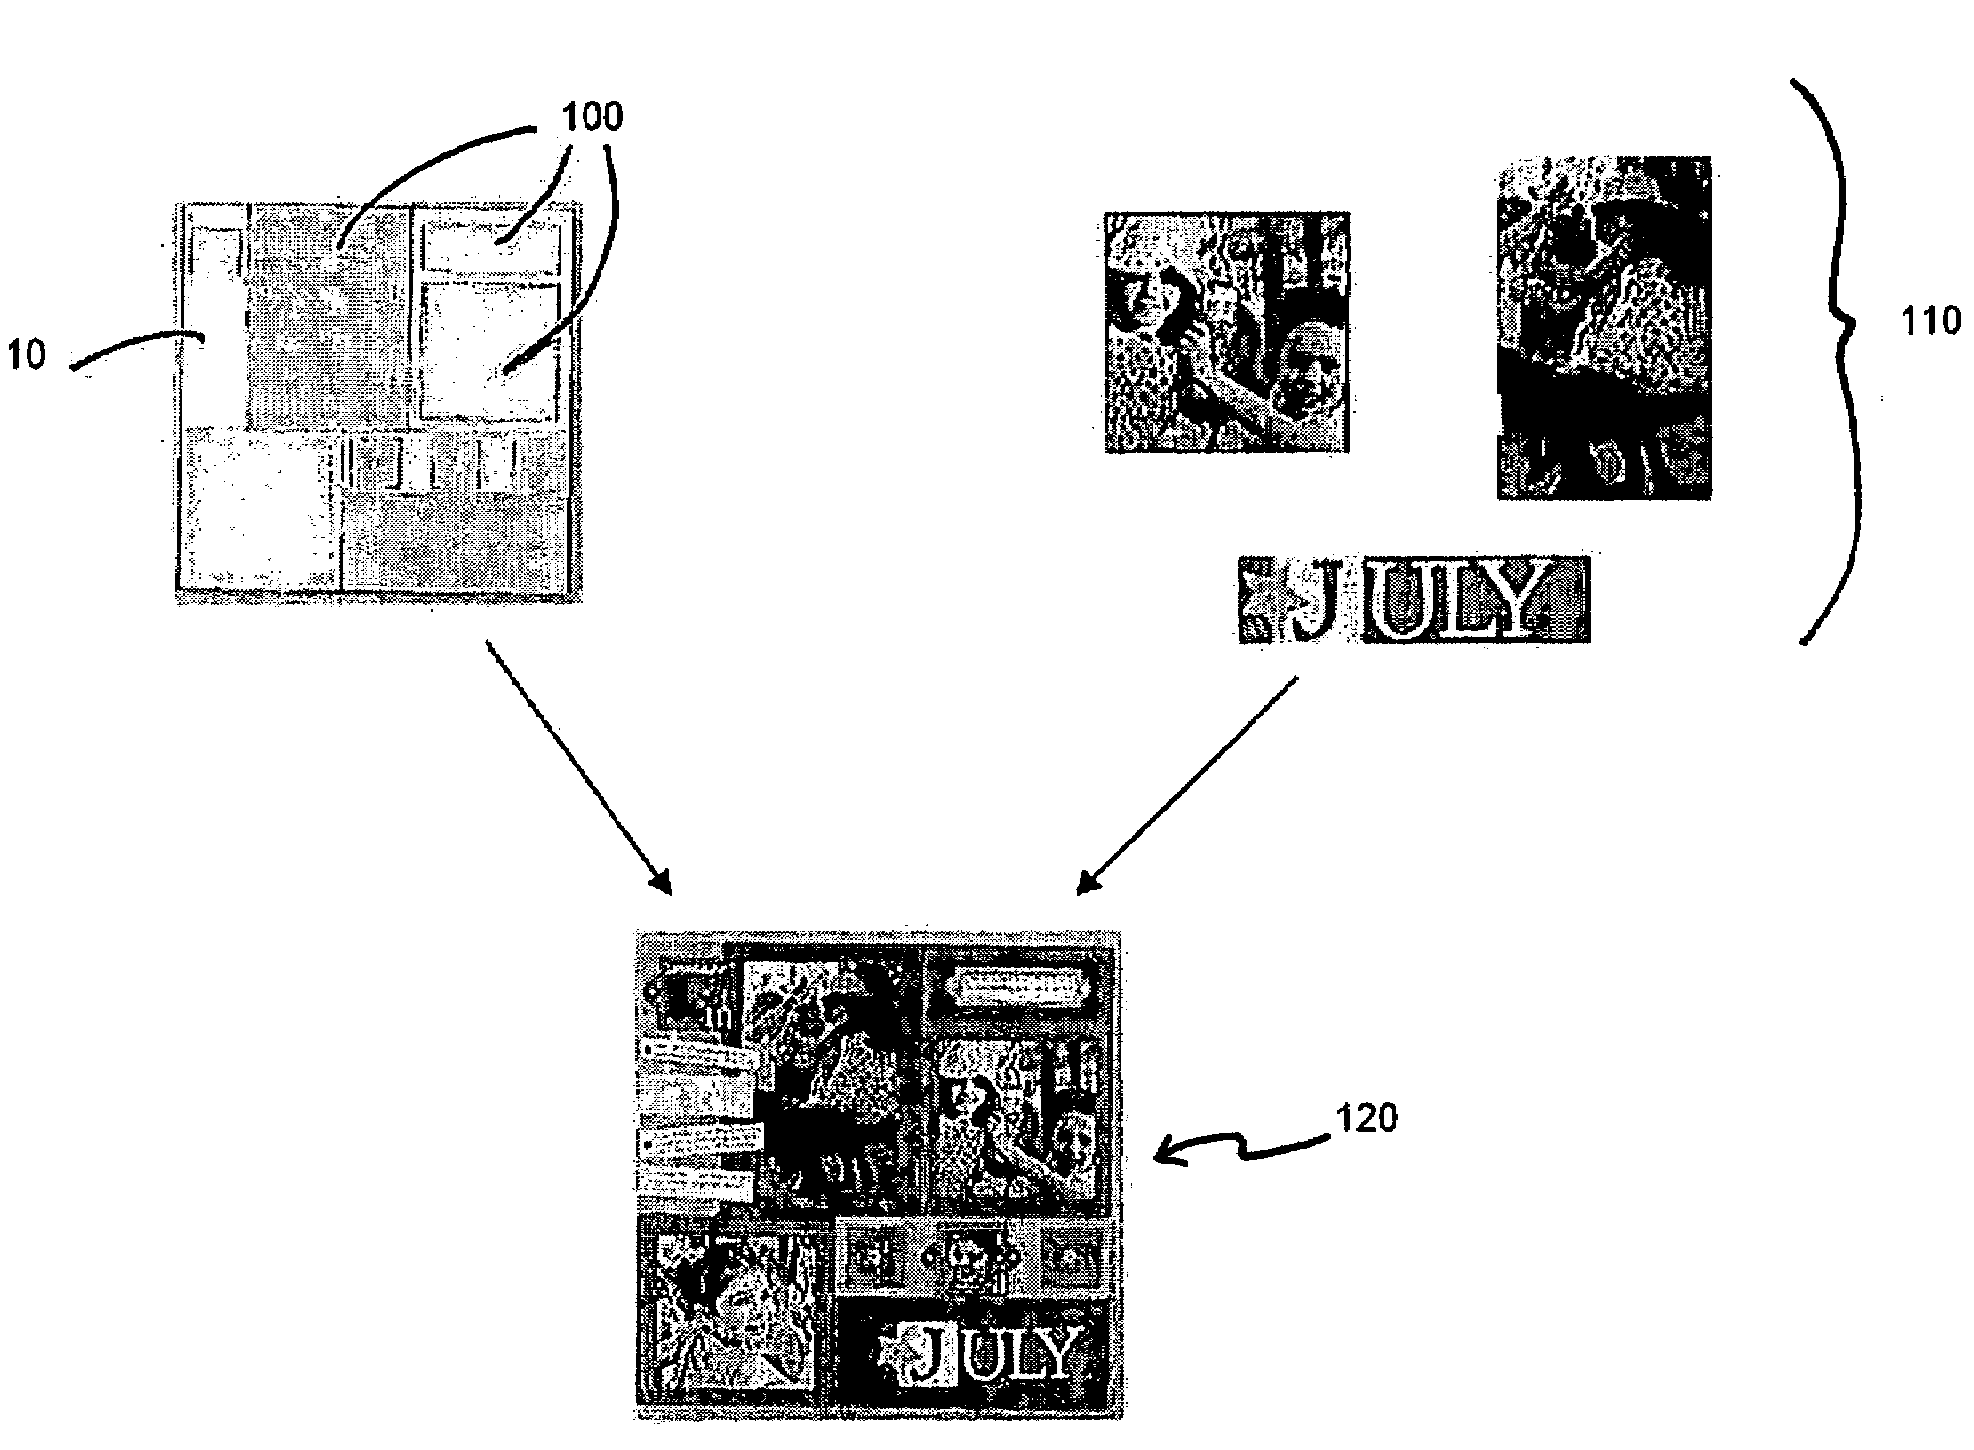 Systems and methods for mounting memorabilia